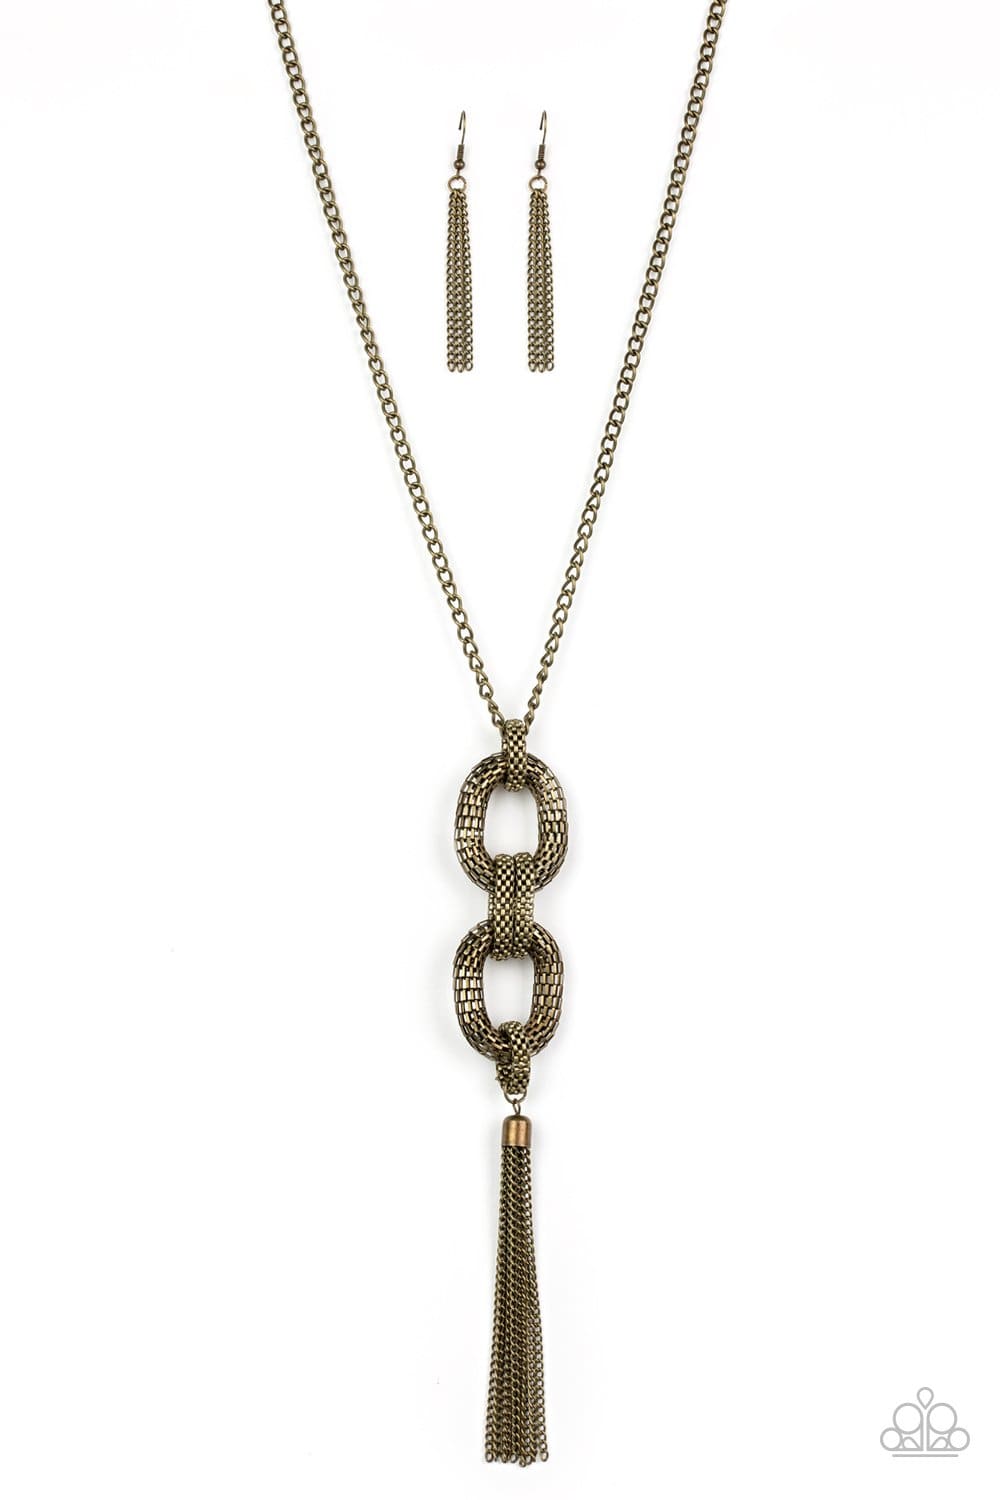 Enmeshed in Mesh - Brass Necklace